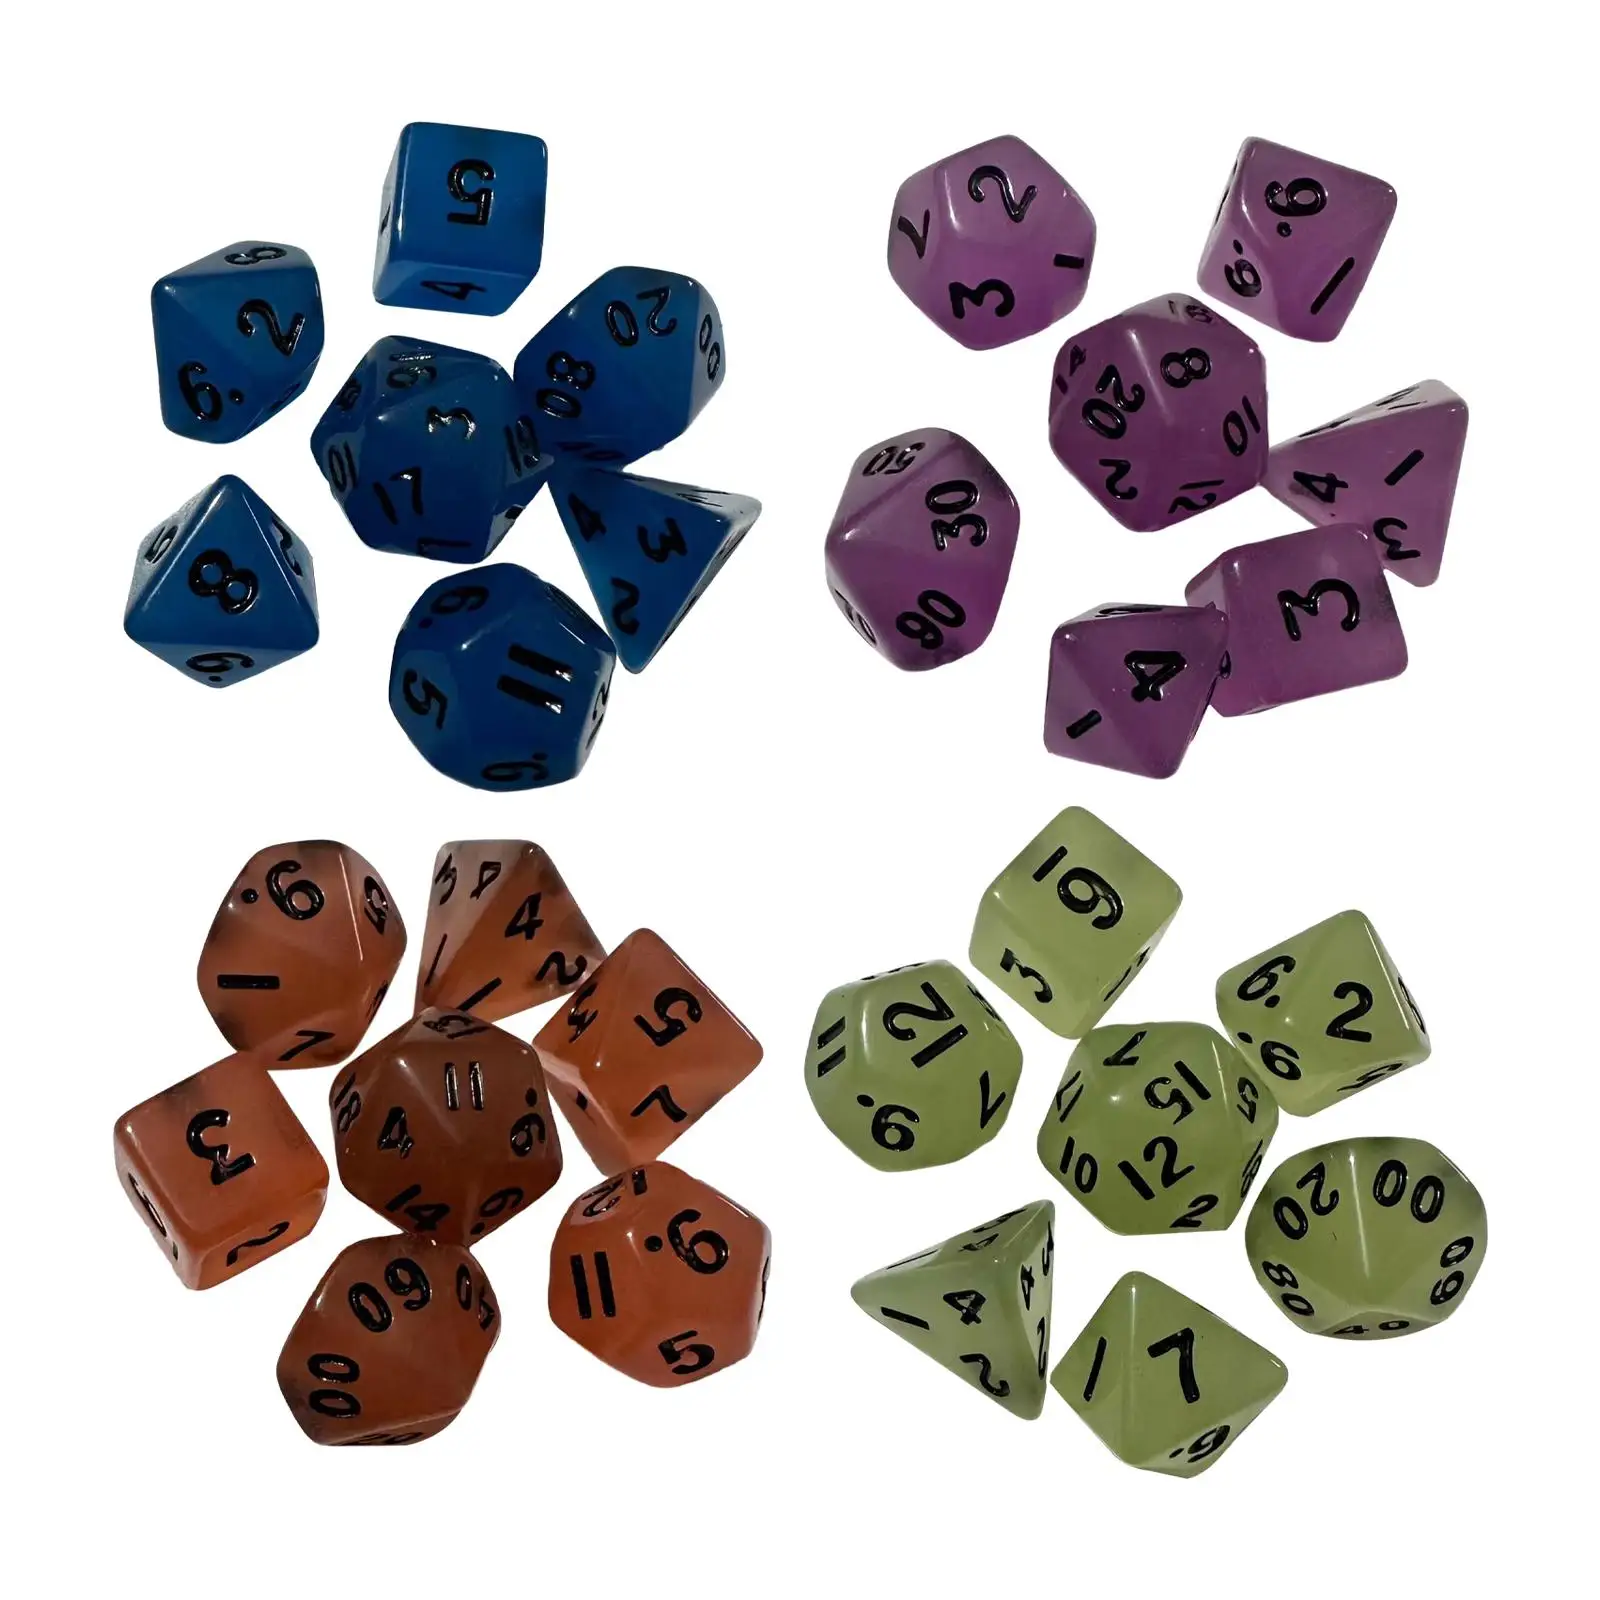 7Pcs Glowing in Dark Dices D4-d20 Polyhedral Dices Set for Role Playing Game